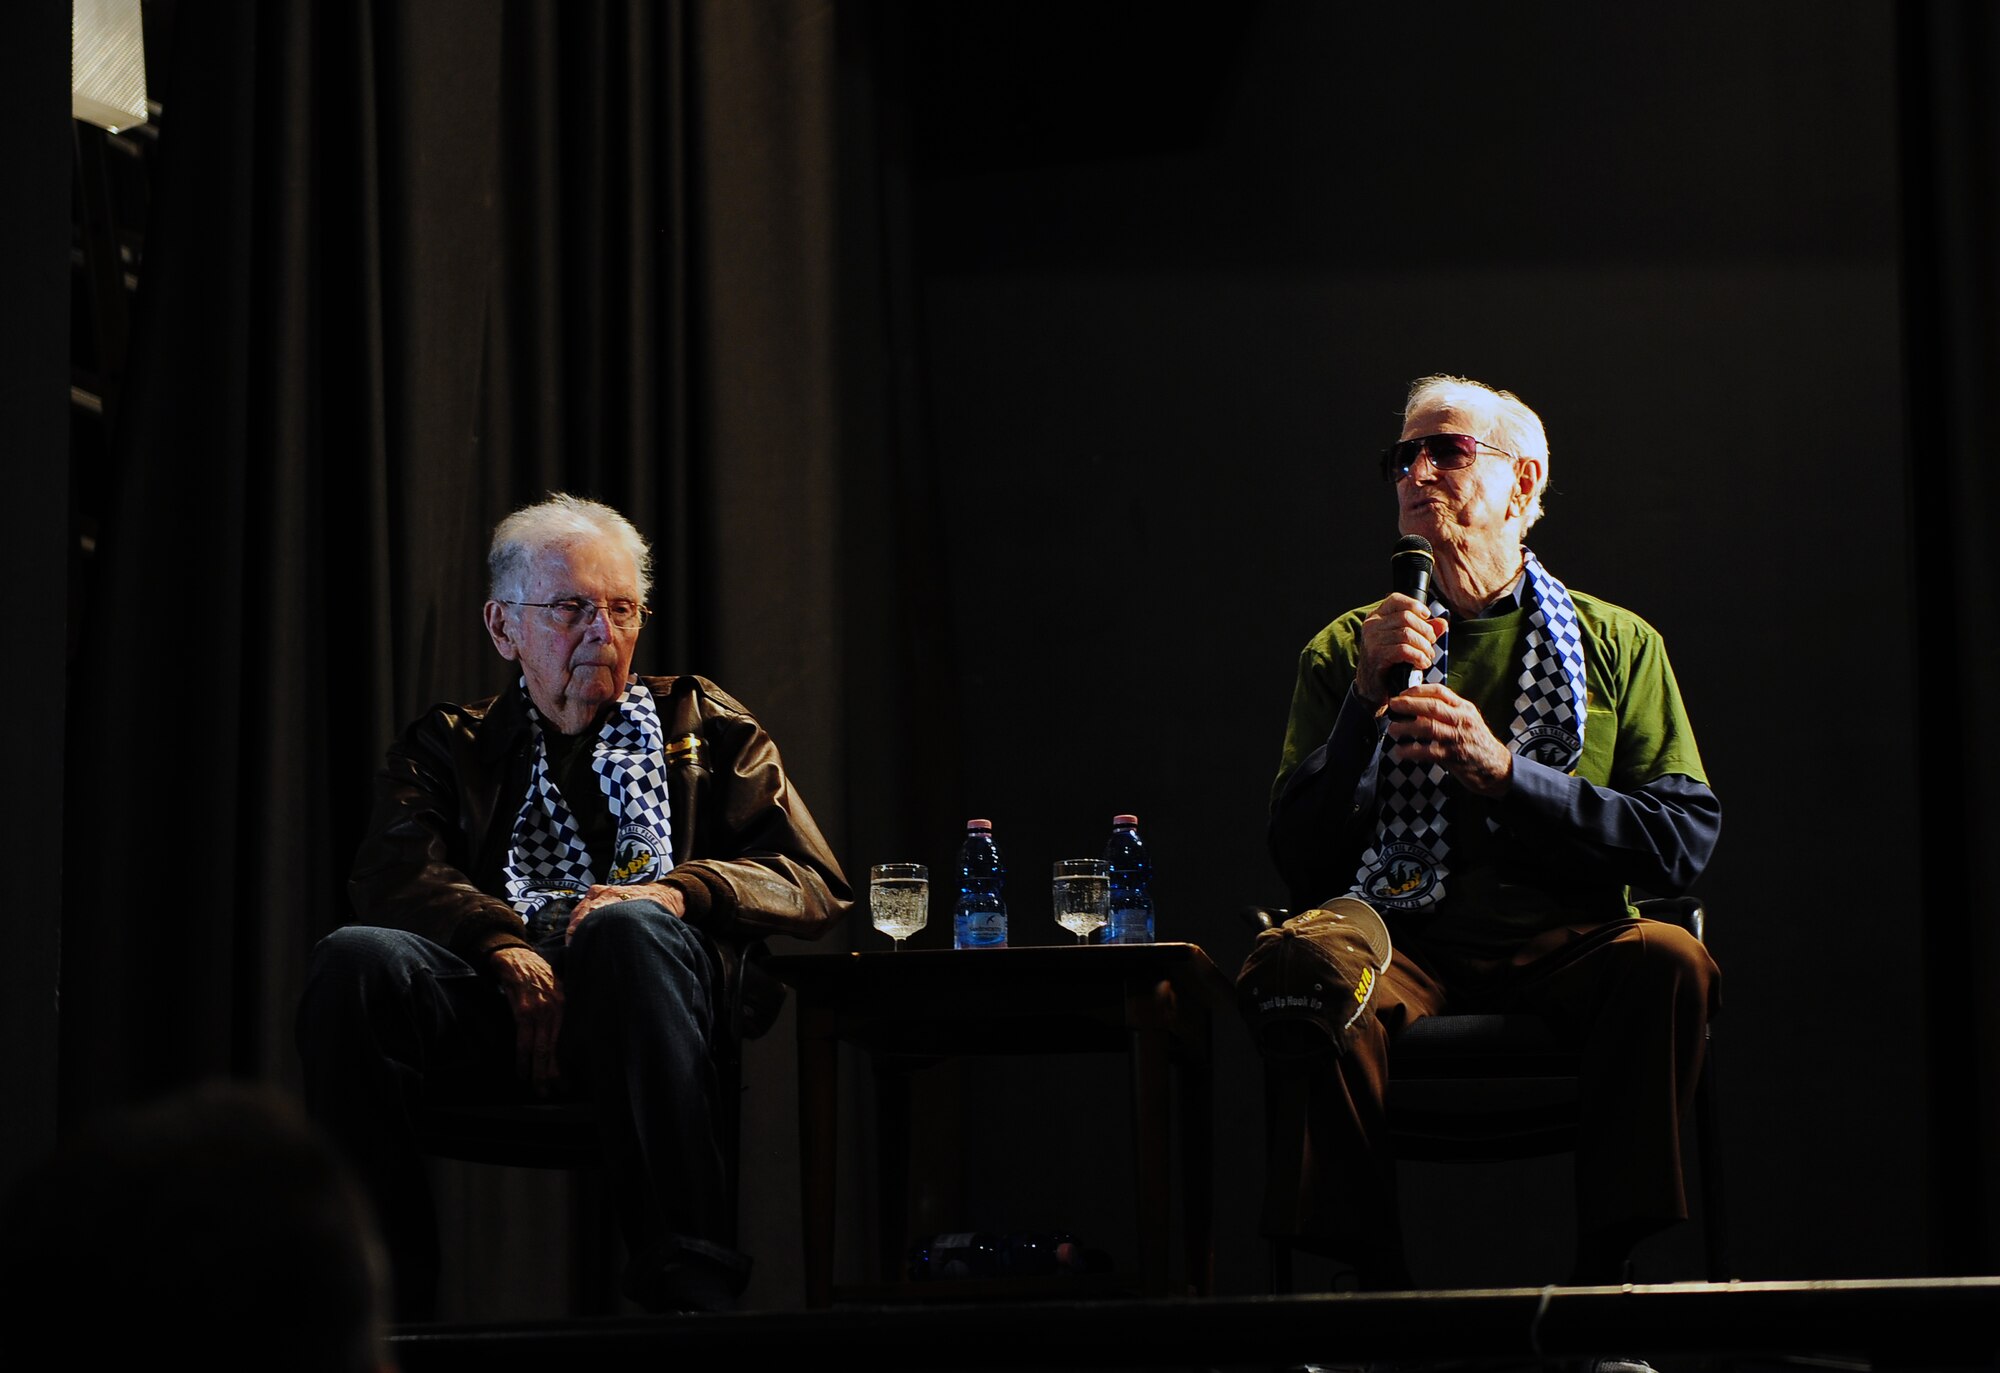 William "Bill" Prindible (left) and Julian "Bud" Rice, World War II veterans and former 37th Troop Carrier Squadron C-47 Skytrain pilots, answer questions from members of Team Ramstein. Rice and Prindible were invited by the 37th Airlift Squadron to participate in events commemorating the 70th anniversary of the D-Day invasion of Normandy. (U.S. Air Force photo/Staff Sgt. Kris Levasseur)
